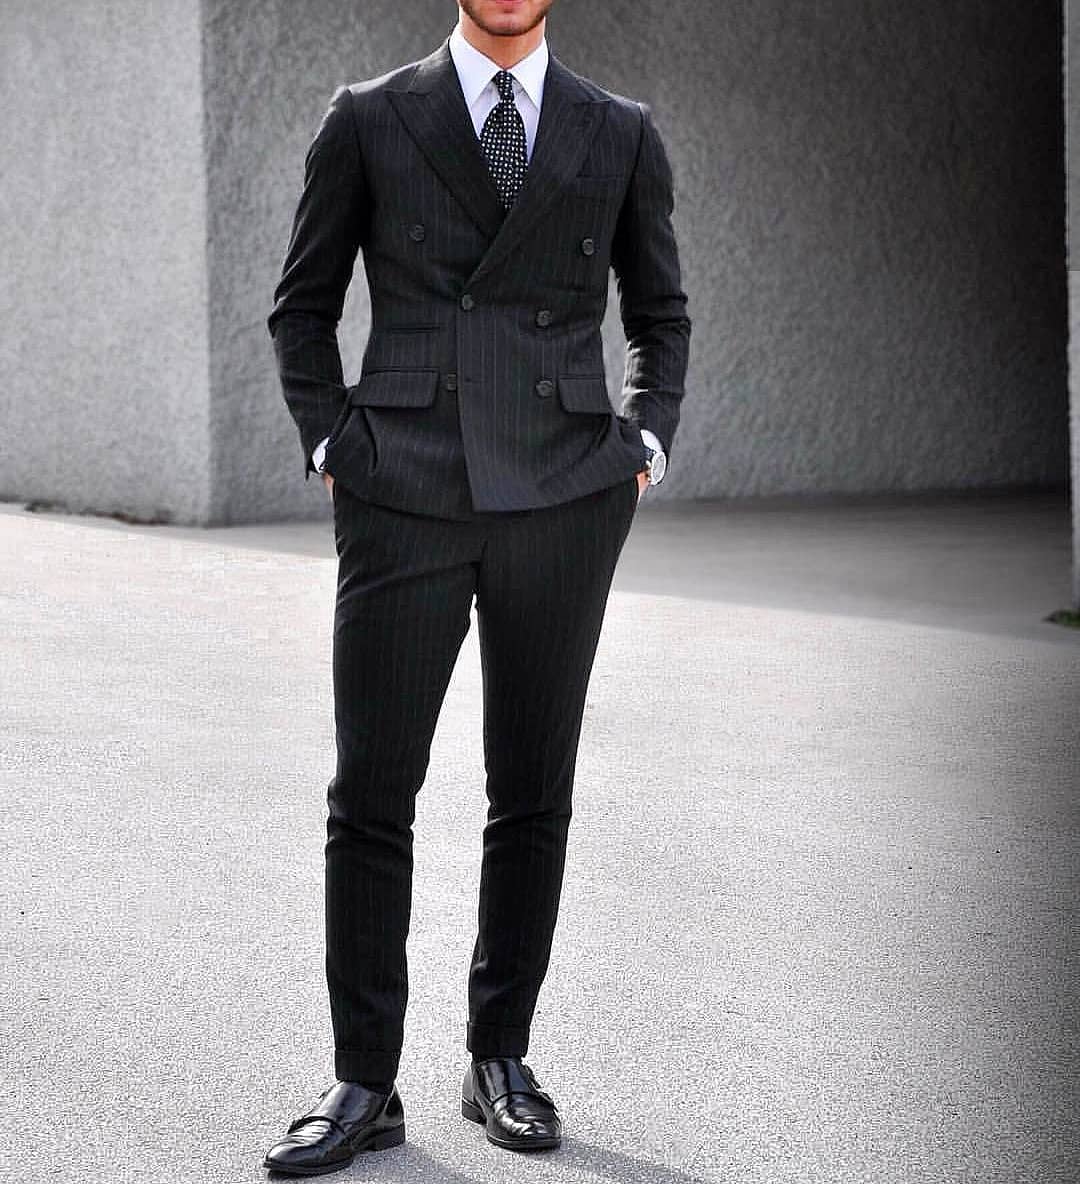 30 Best Funeral Outfits for Teen Boys-What to Wear to Funeral